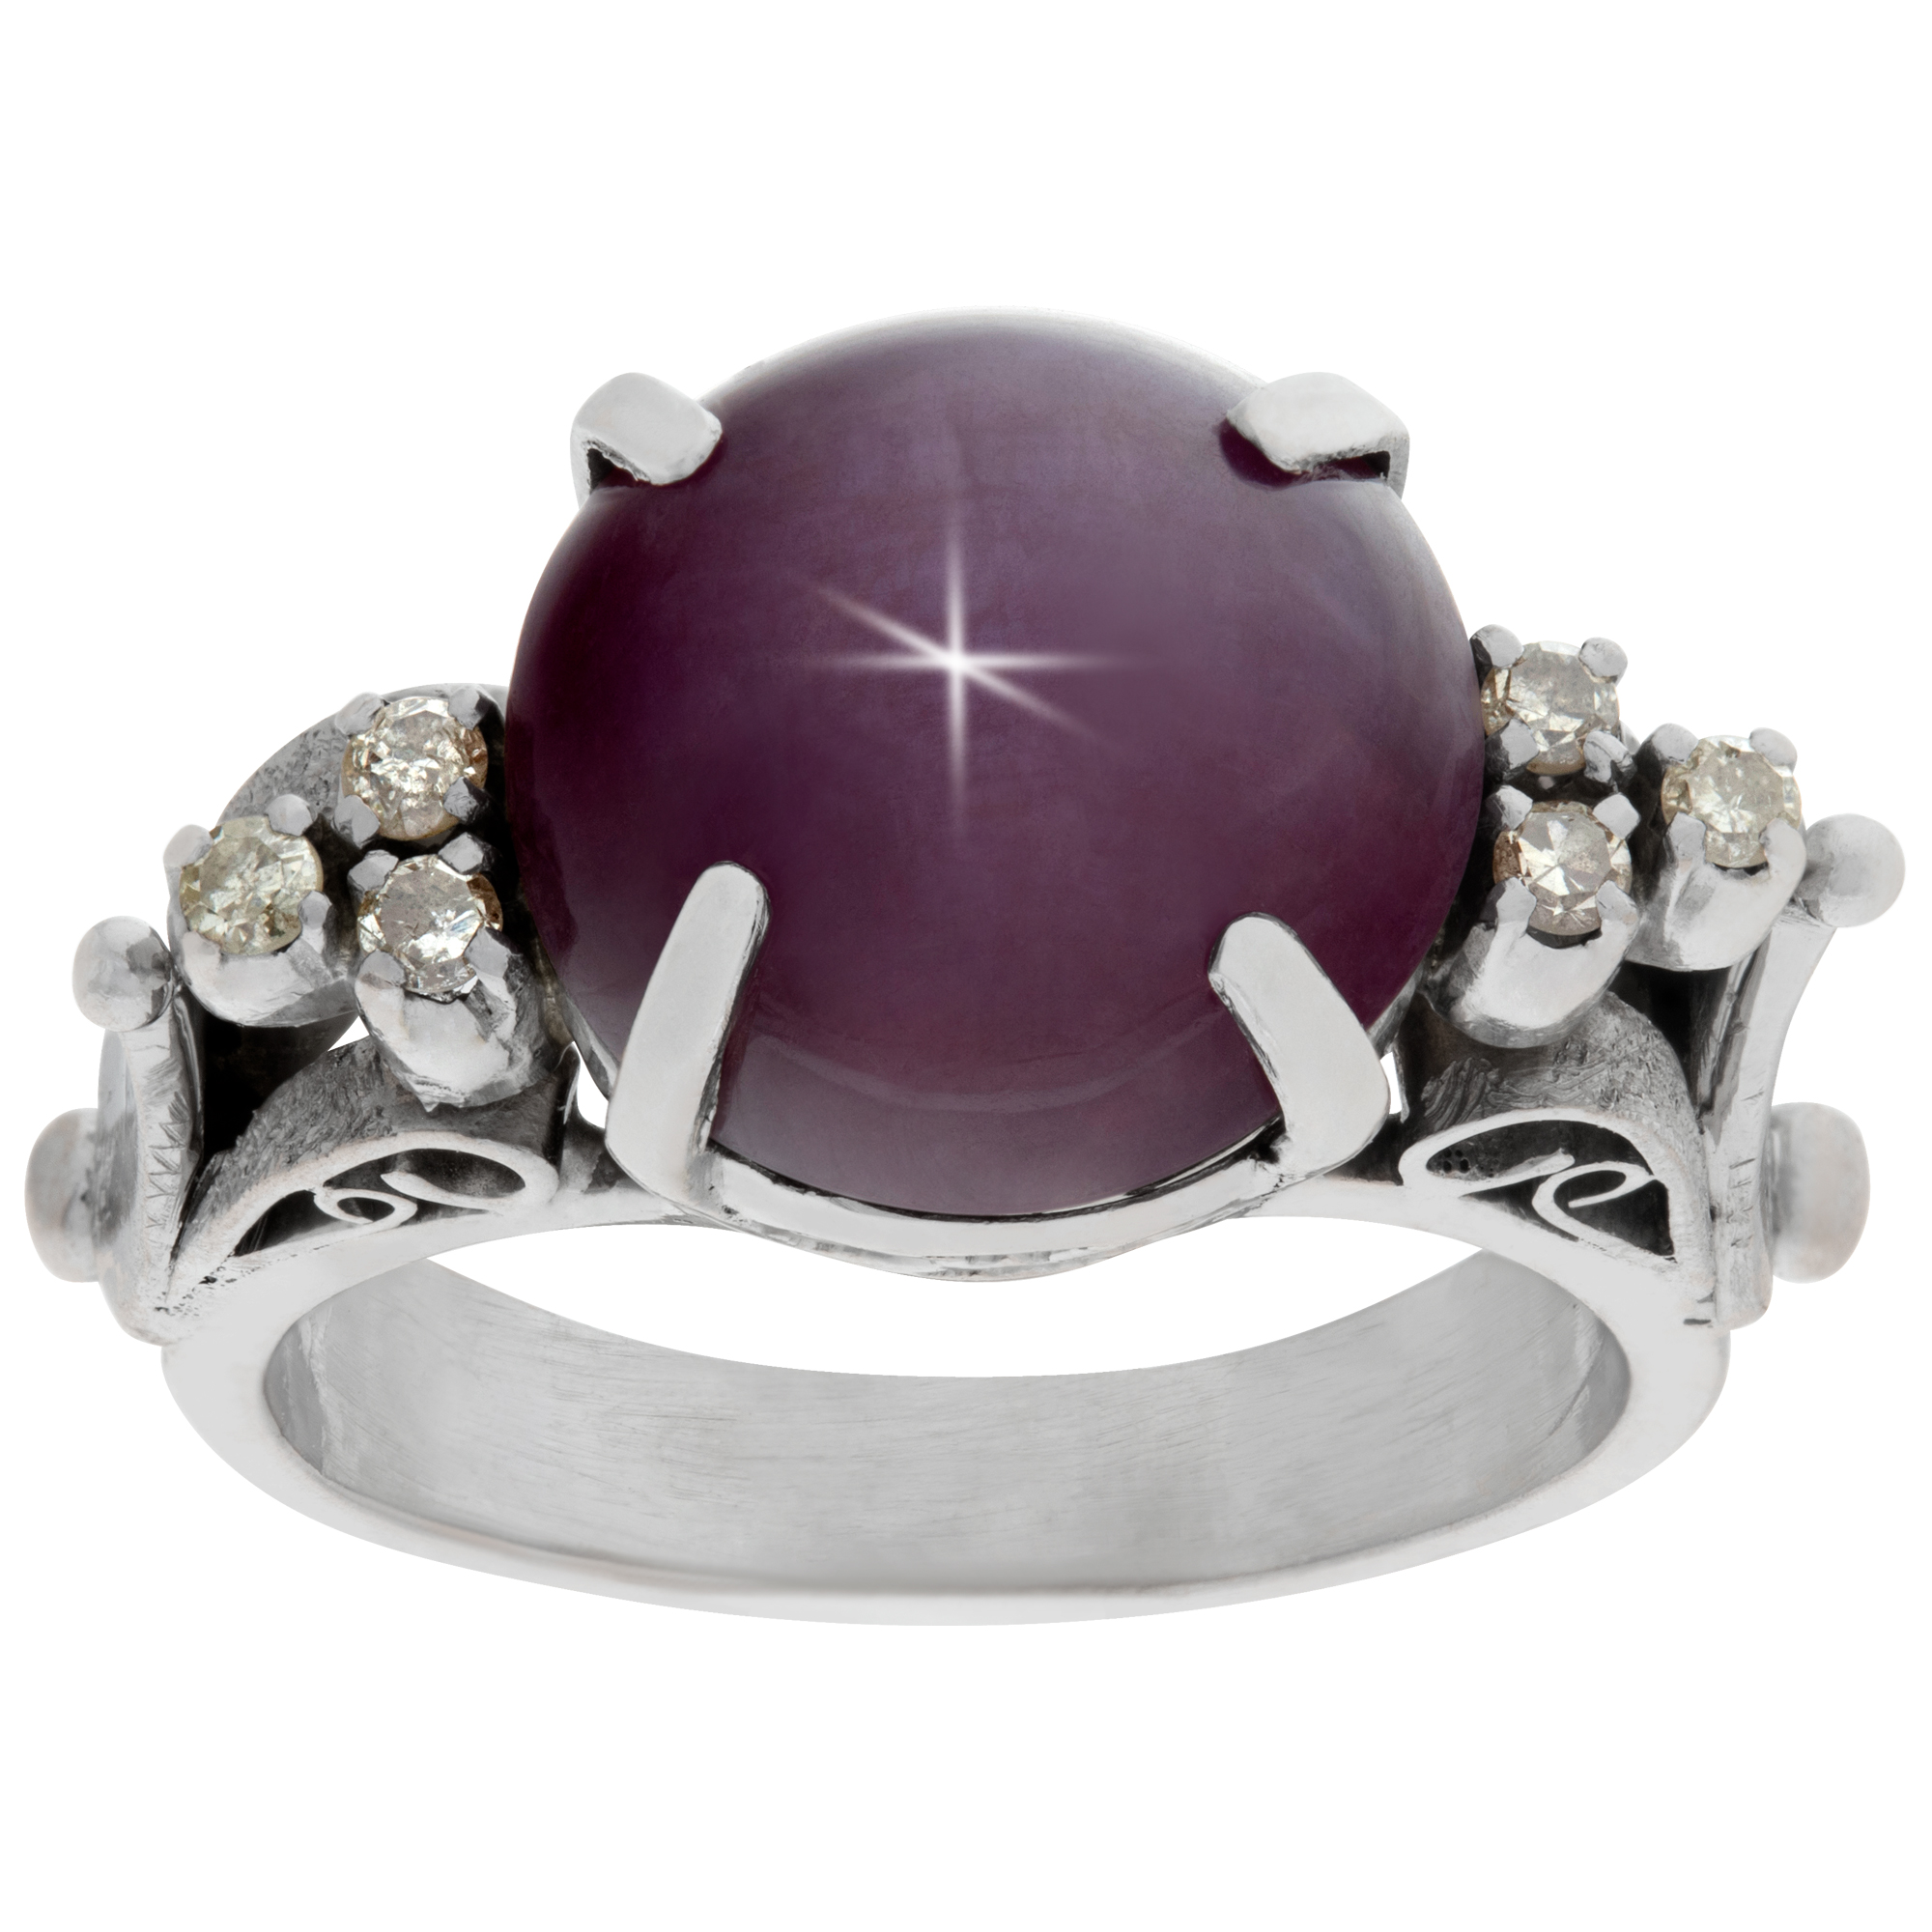 Ruby star sapphire ring in 14k white gold with diamond accents, approximate 4 carat star ruby